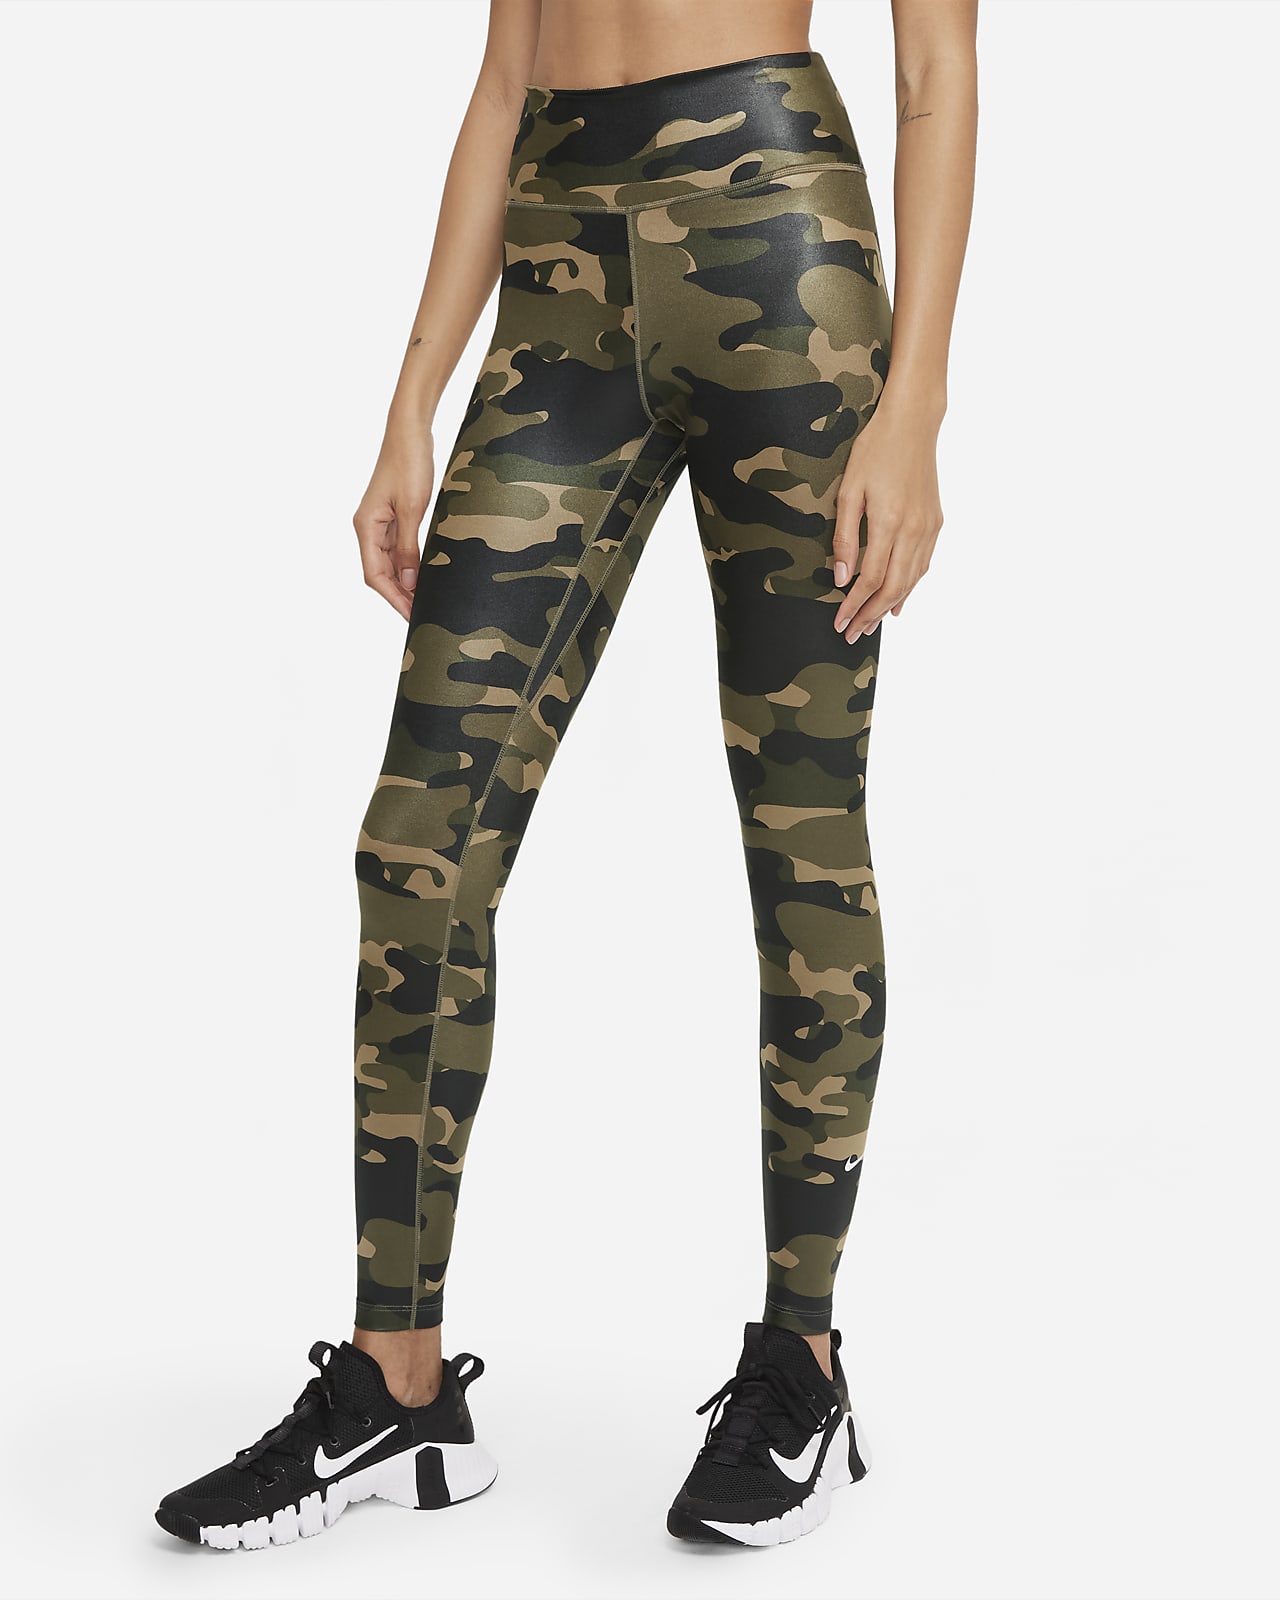 https://static.nike.com/a/images/t_PDP_1280_v1/f_auto,q_auto:eco/31ce6256-d4ed-42b8-a5cb-c7afdc4e383d/leggings-de-tiro-medio-camuflajeados-one-7NDp2Z.png